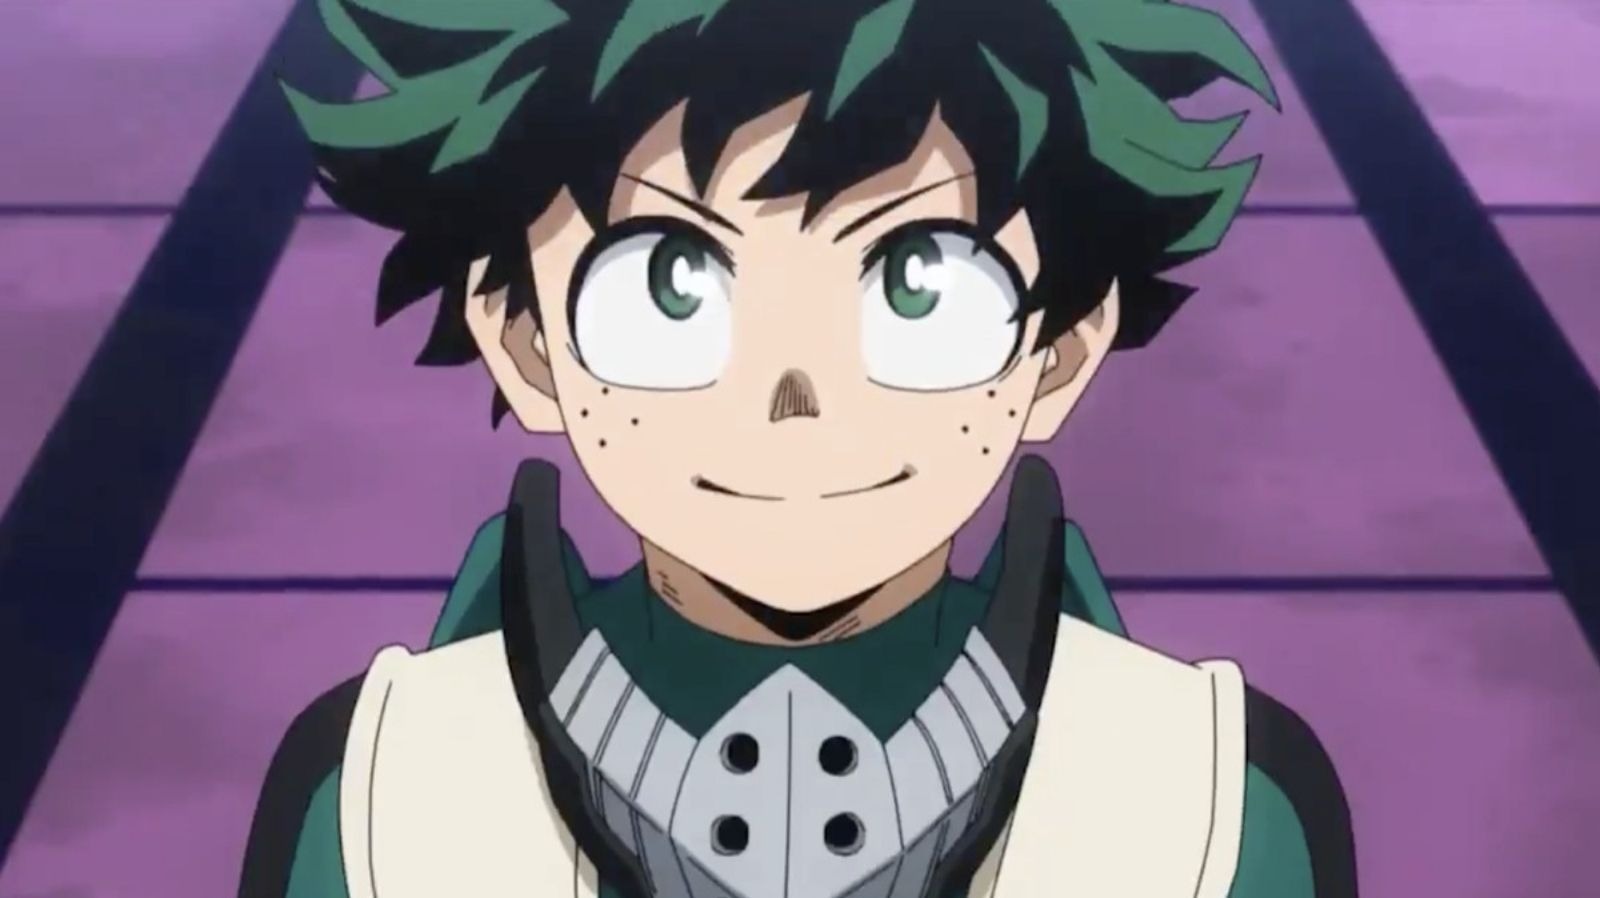 My Hero Academia Season 6 Announces Release Date for First Episode!